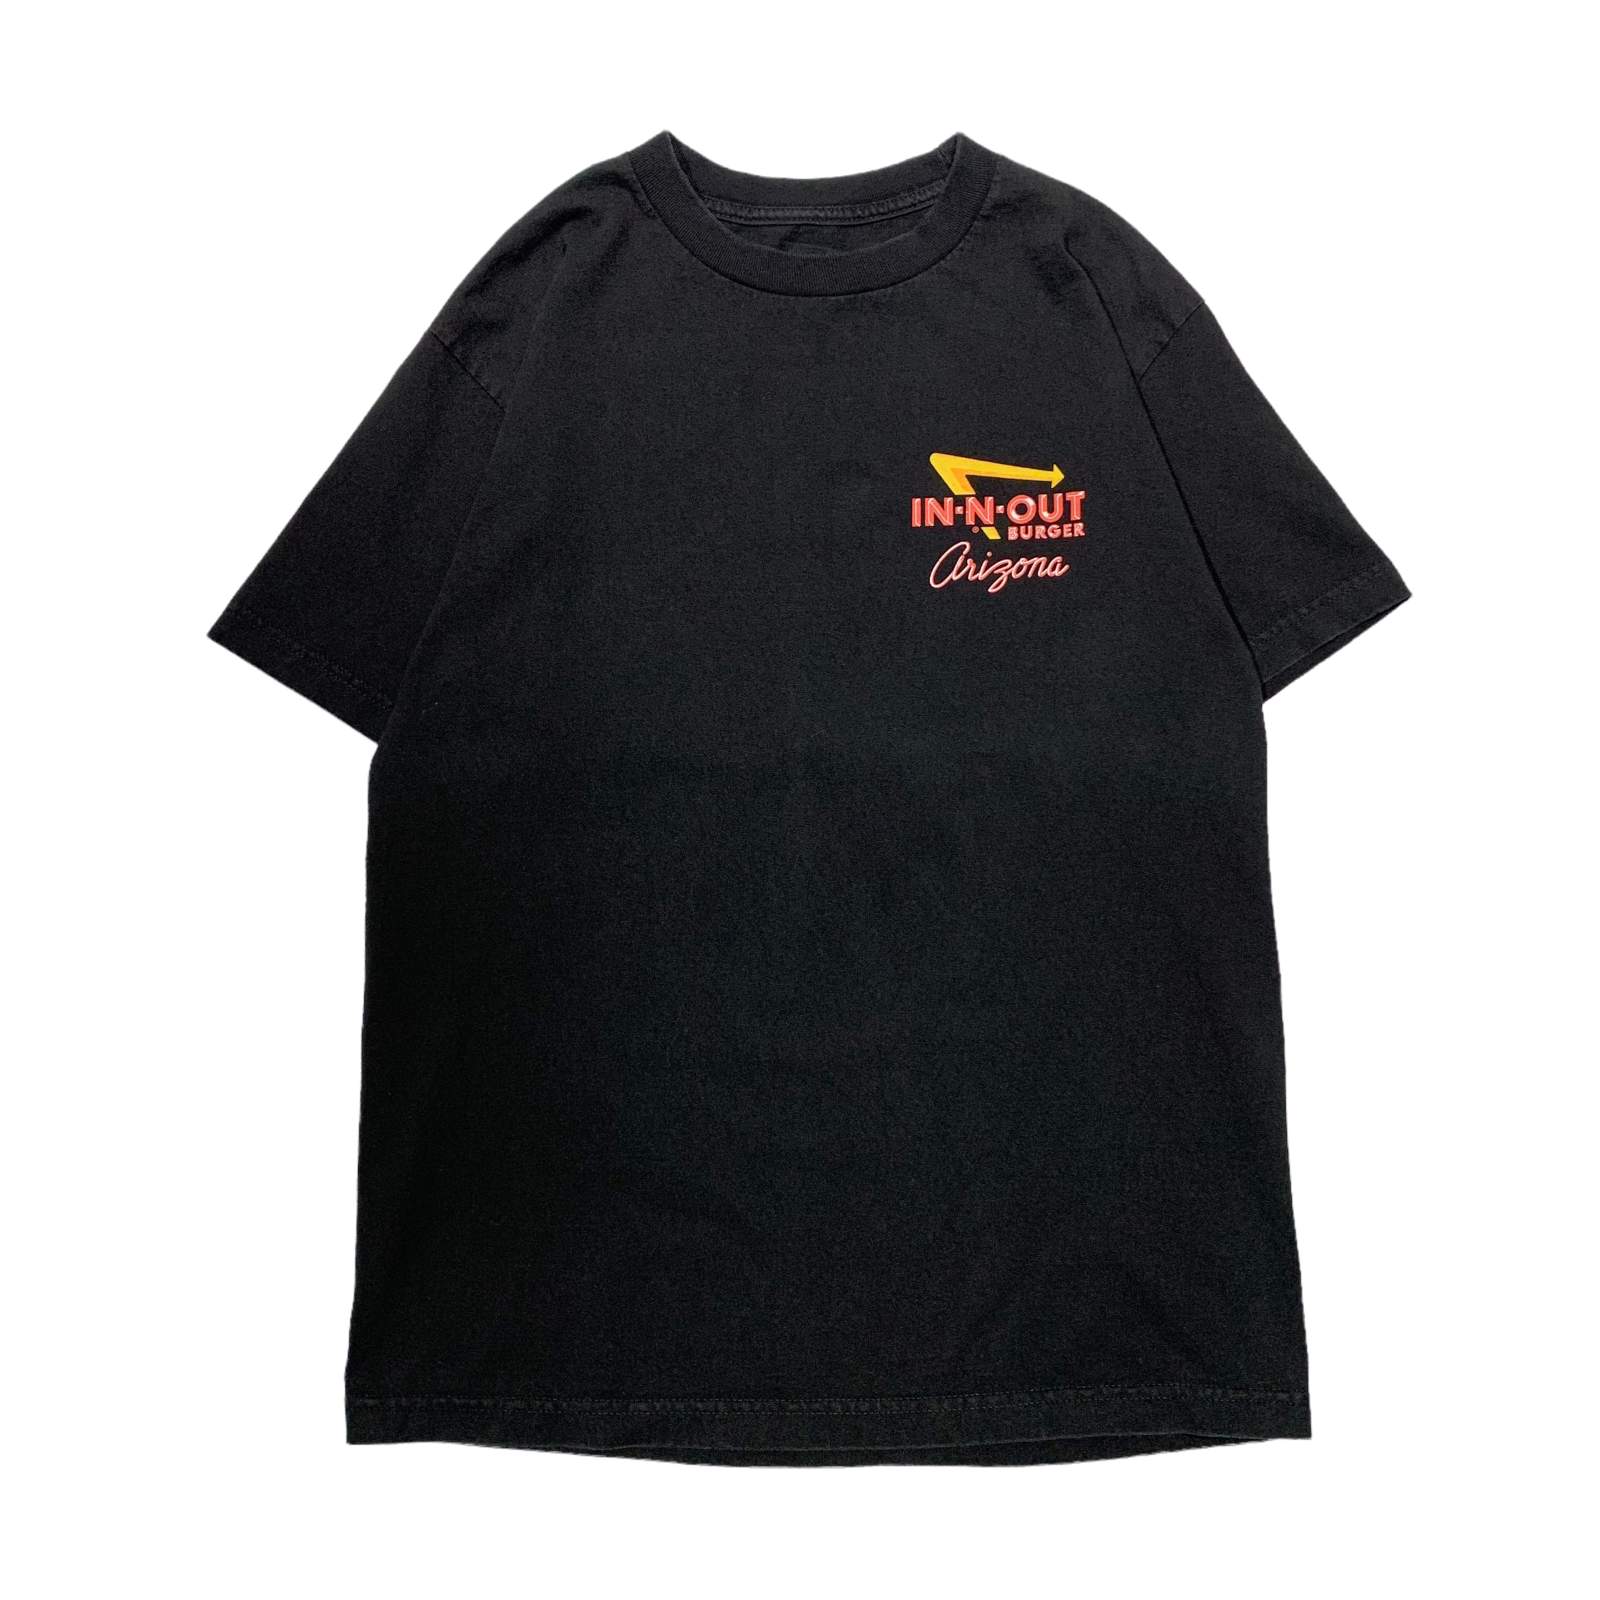 IN-N-OUT BURGER 両面プリント アドバタイジングTシャツ メンズL /eaa339752